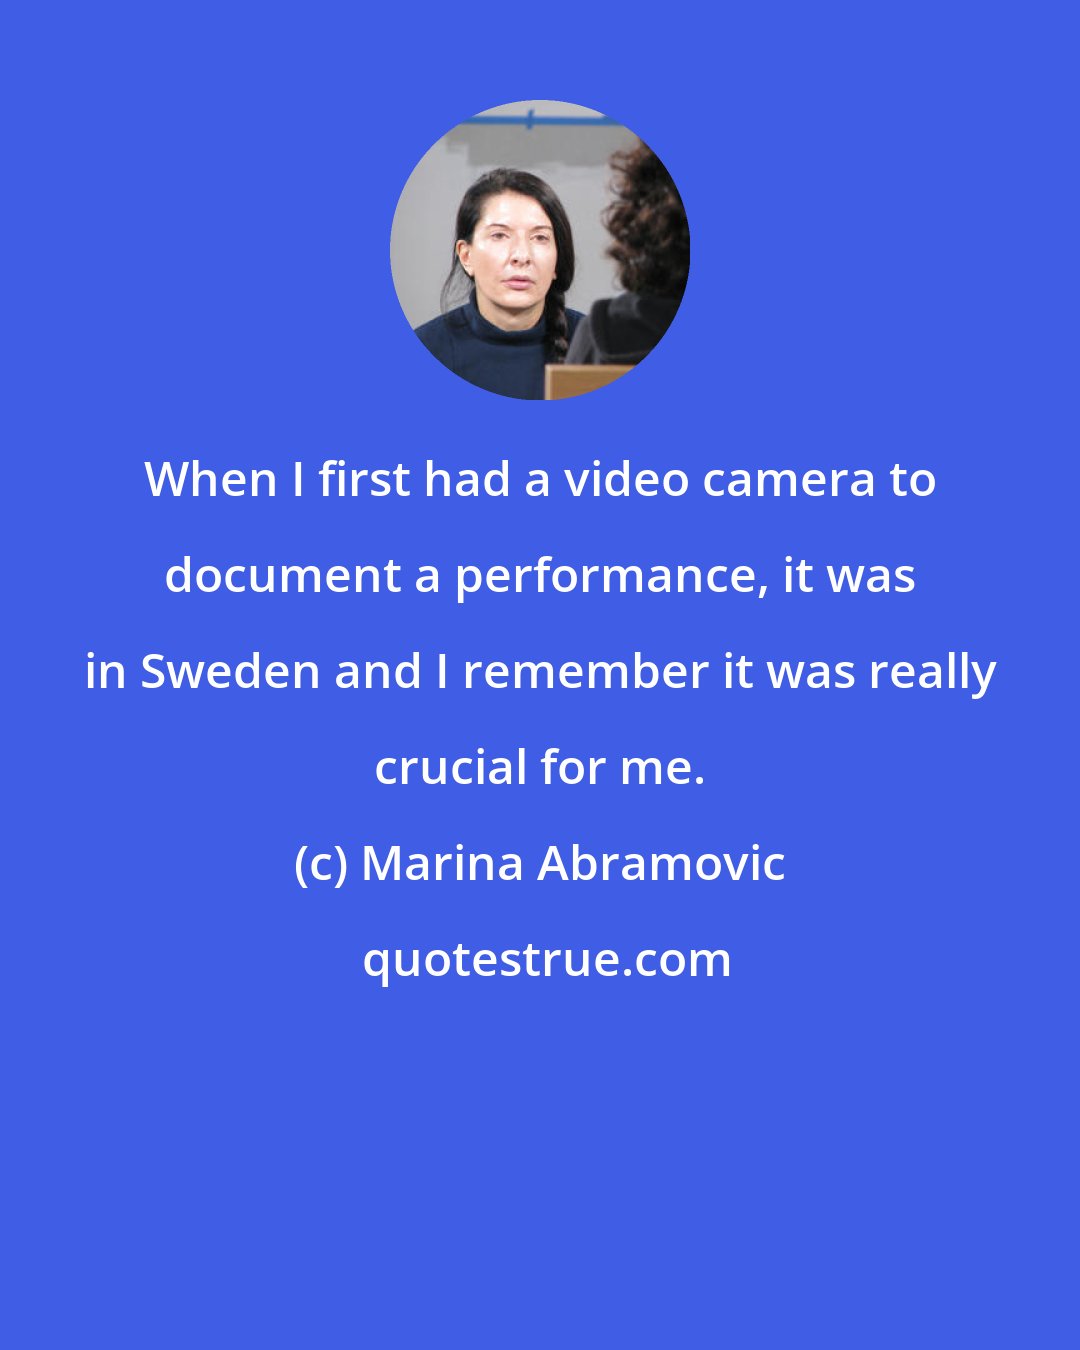 Marina Abramovic: When I first had a video camera to document a performance, it was in Sweden and I remember it was really crucial for me.